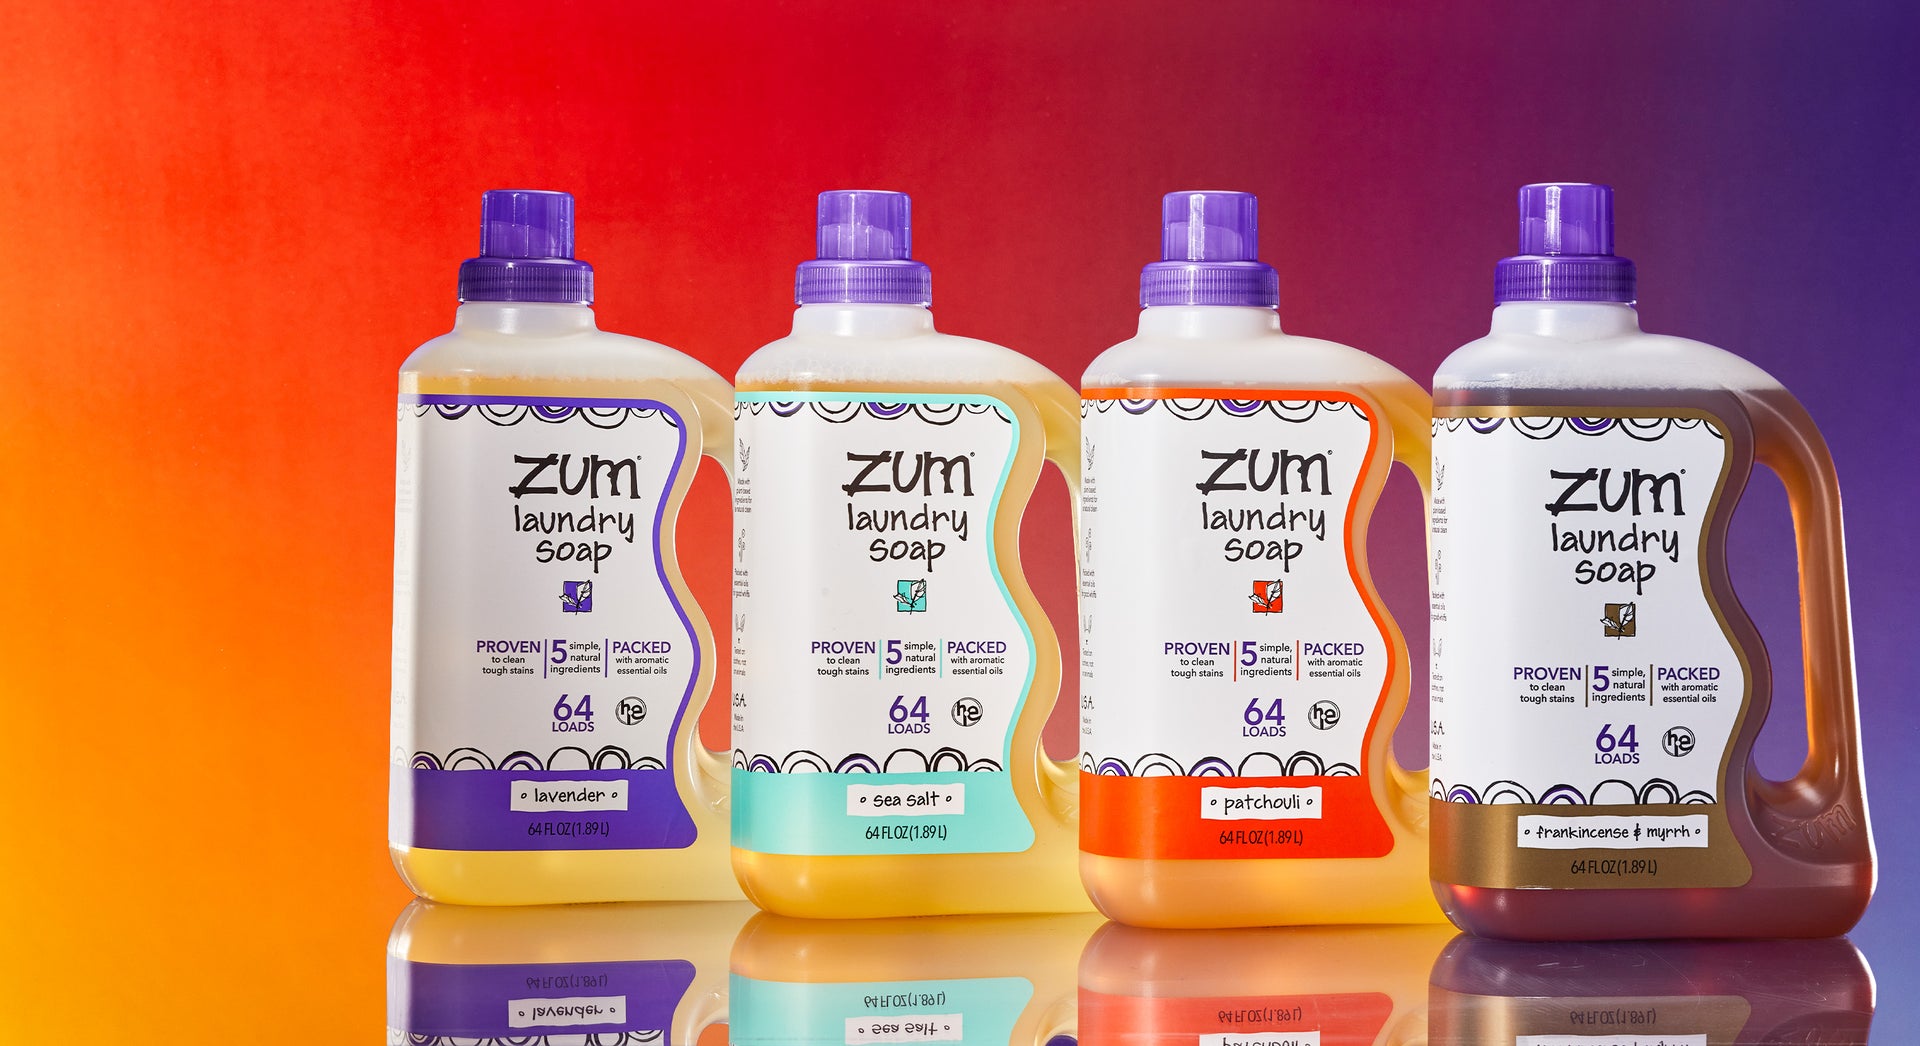 Lavender, Sea Salt, Patchouli, and Frankincense & Myrrh 64 fl. oz. bottles of laundry soap lined up diagonally on a mirrored surface. Orange to purple gradient background.